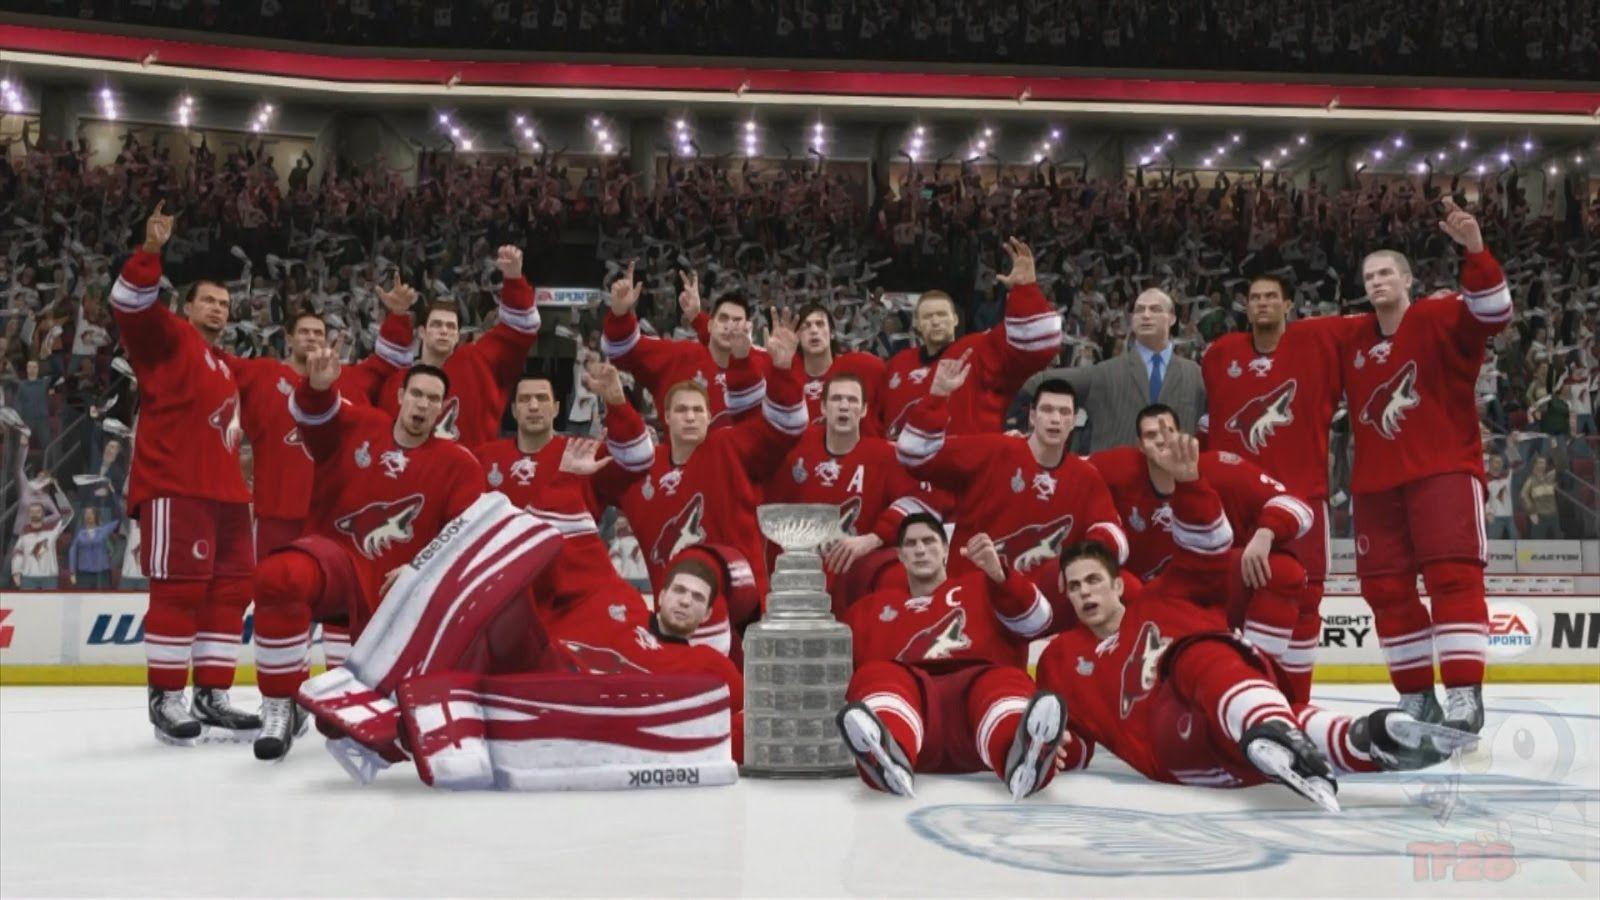 NHL 14 Coyotes Stanley Cup Championship Celebration